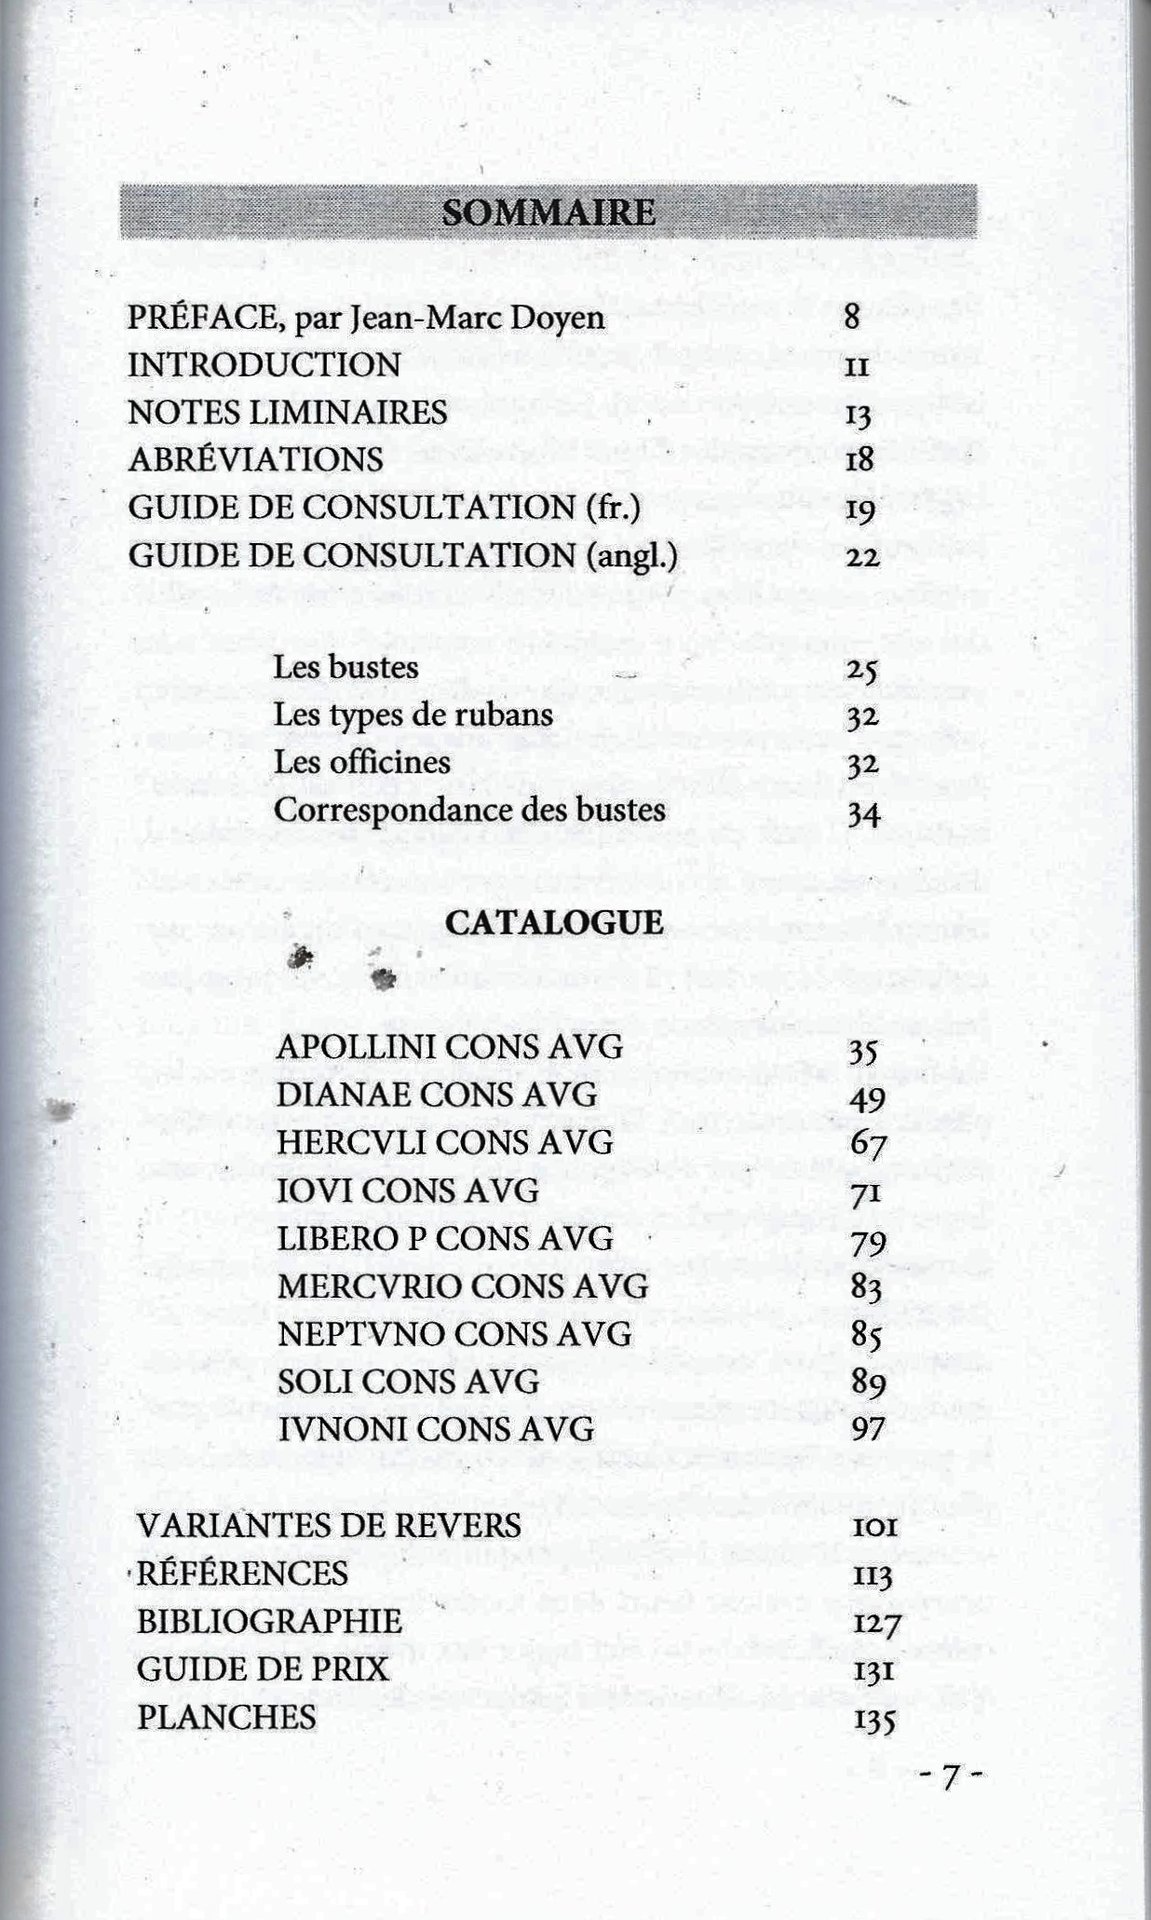 Wolkow Table of Contents.jpg